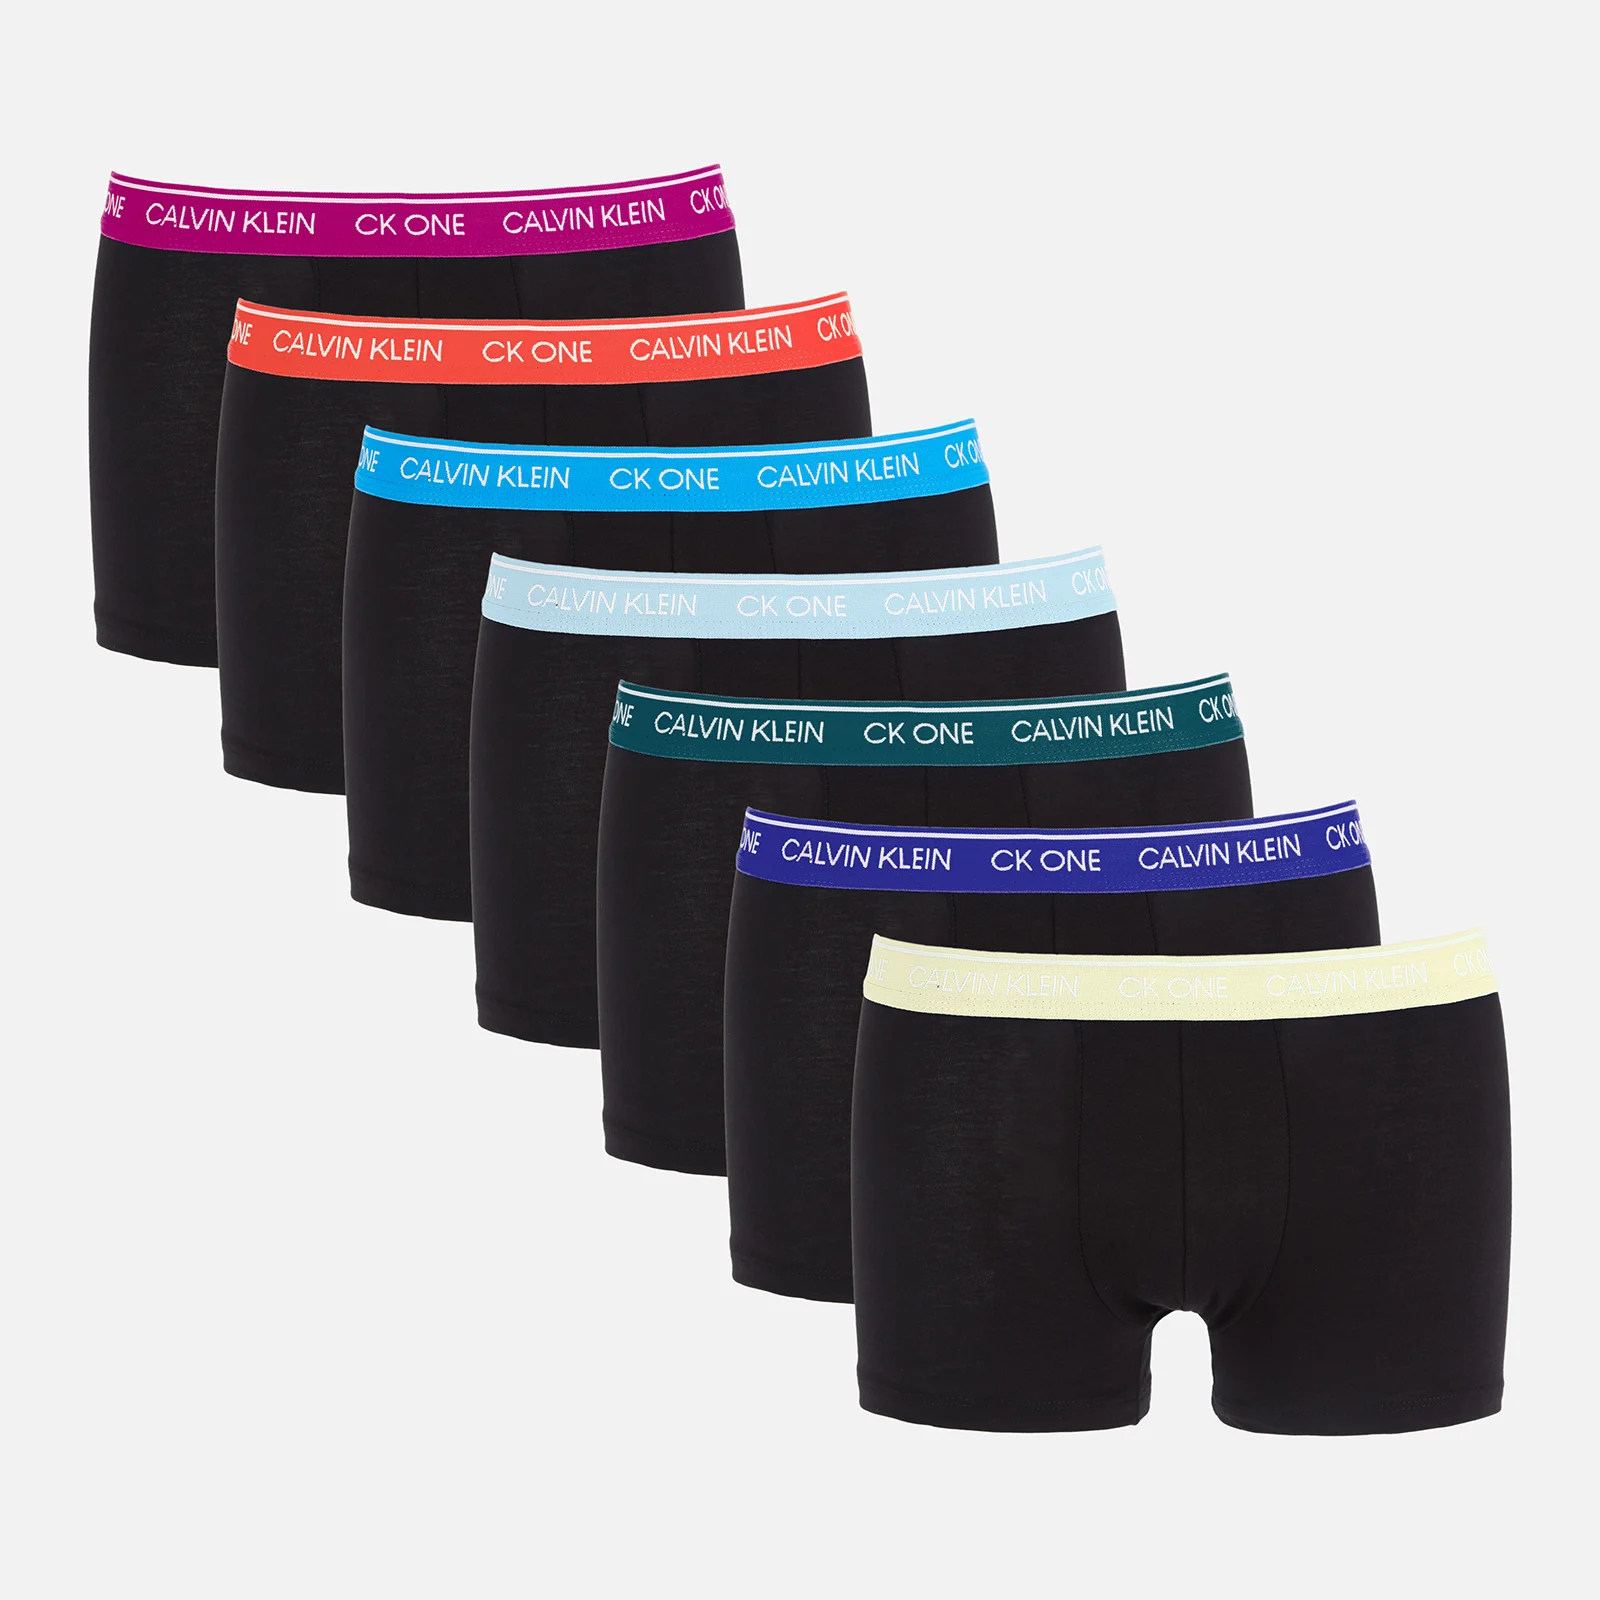 Calvin Klein Men's Cotton Stretch 7 Pack Trunks with Contrast Waistband - Multi Image 1